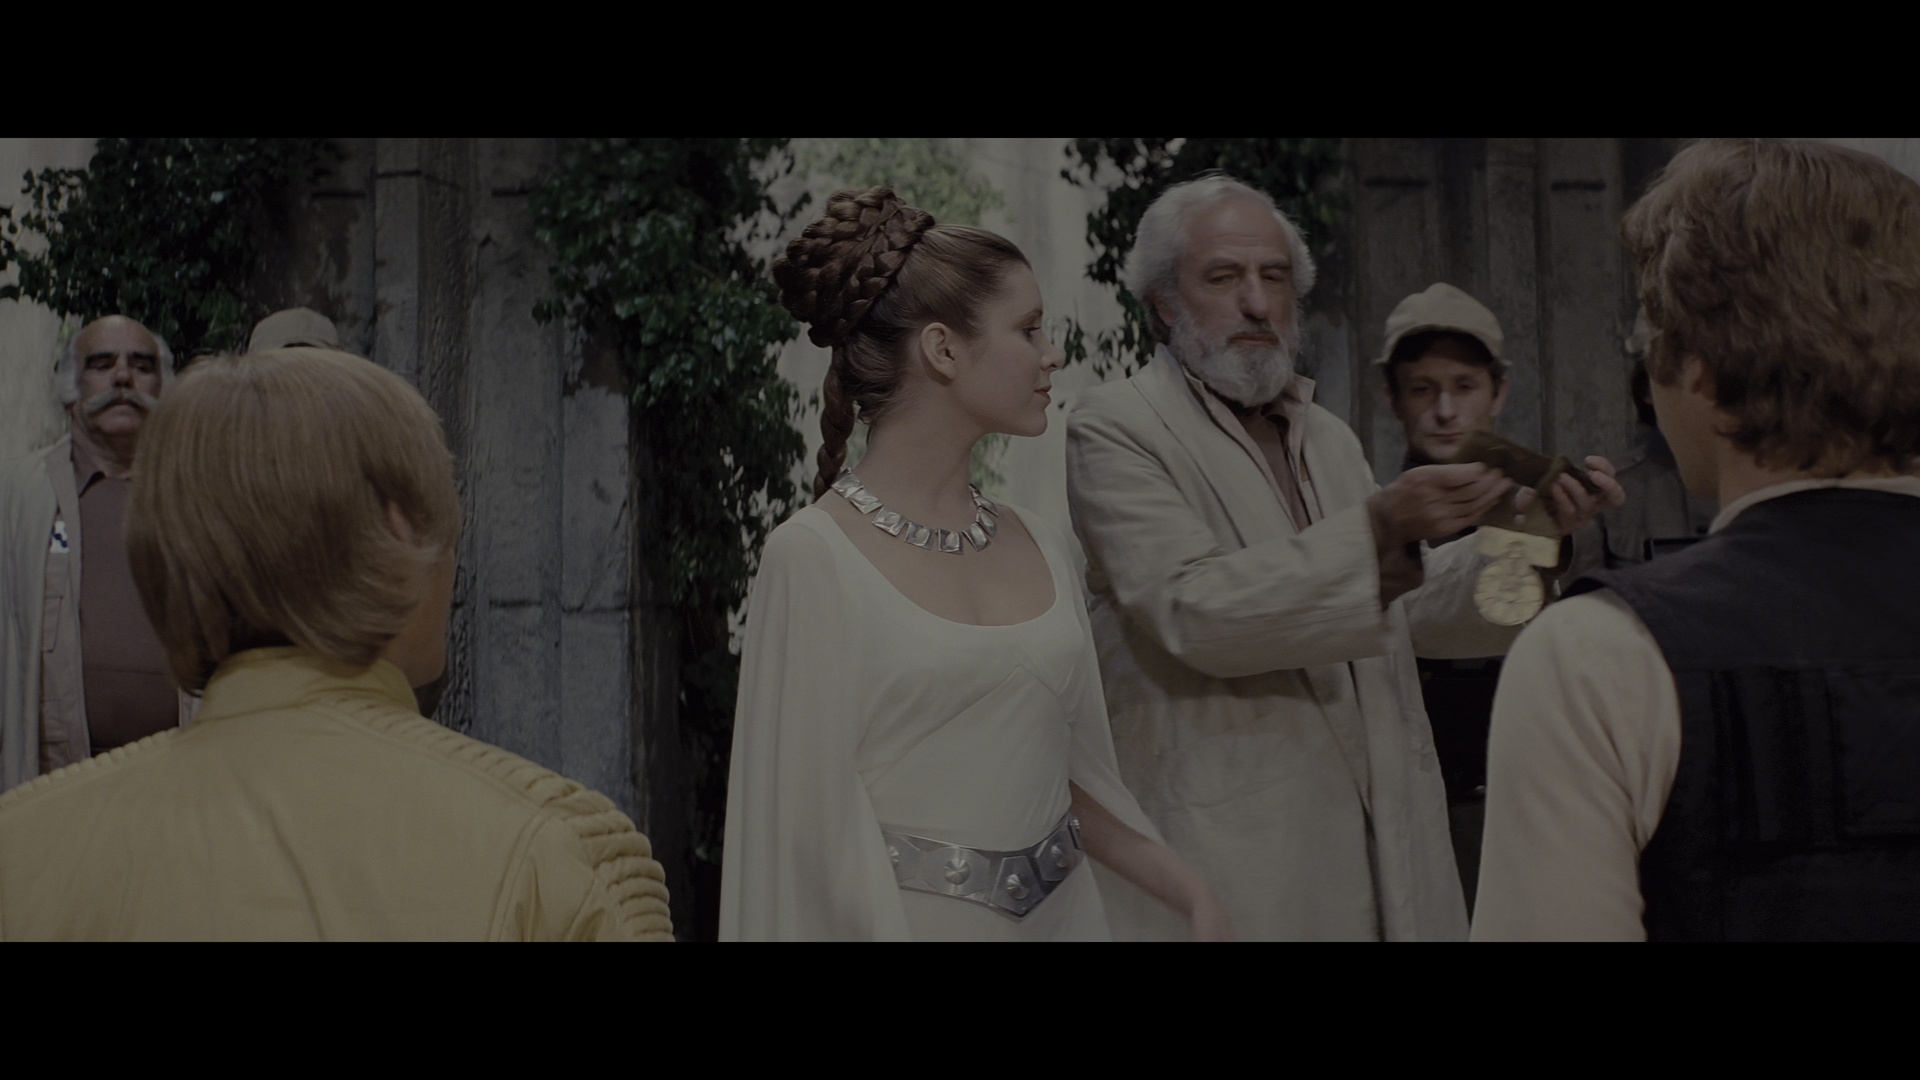 STAR WARS: A NEW HOPE (1977) - Princess Leia's (Carrie Fisher) Screen-Matched Ceremonial Dress - Image 32 of 39